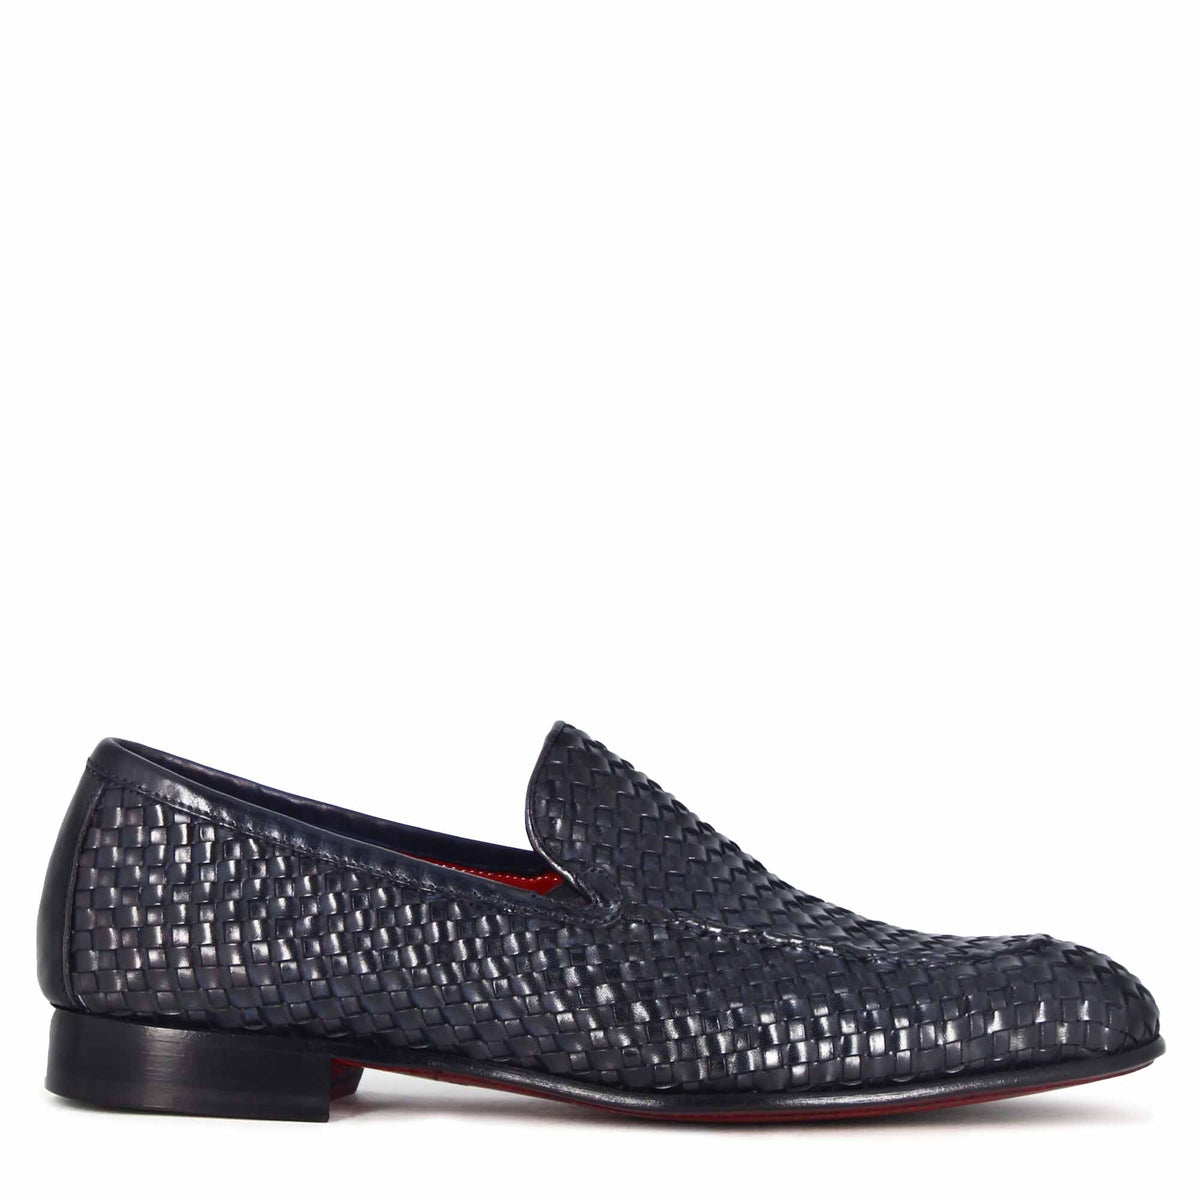 Classic men's loafer in blue woven leather